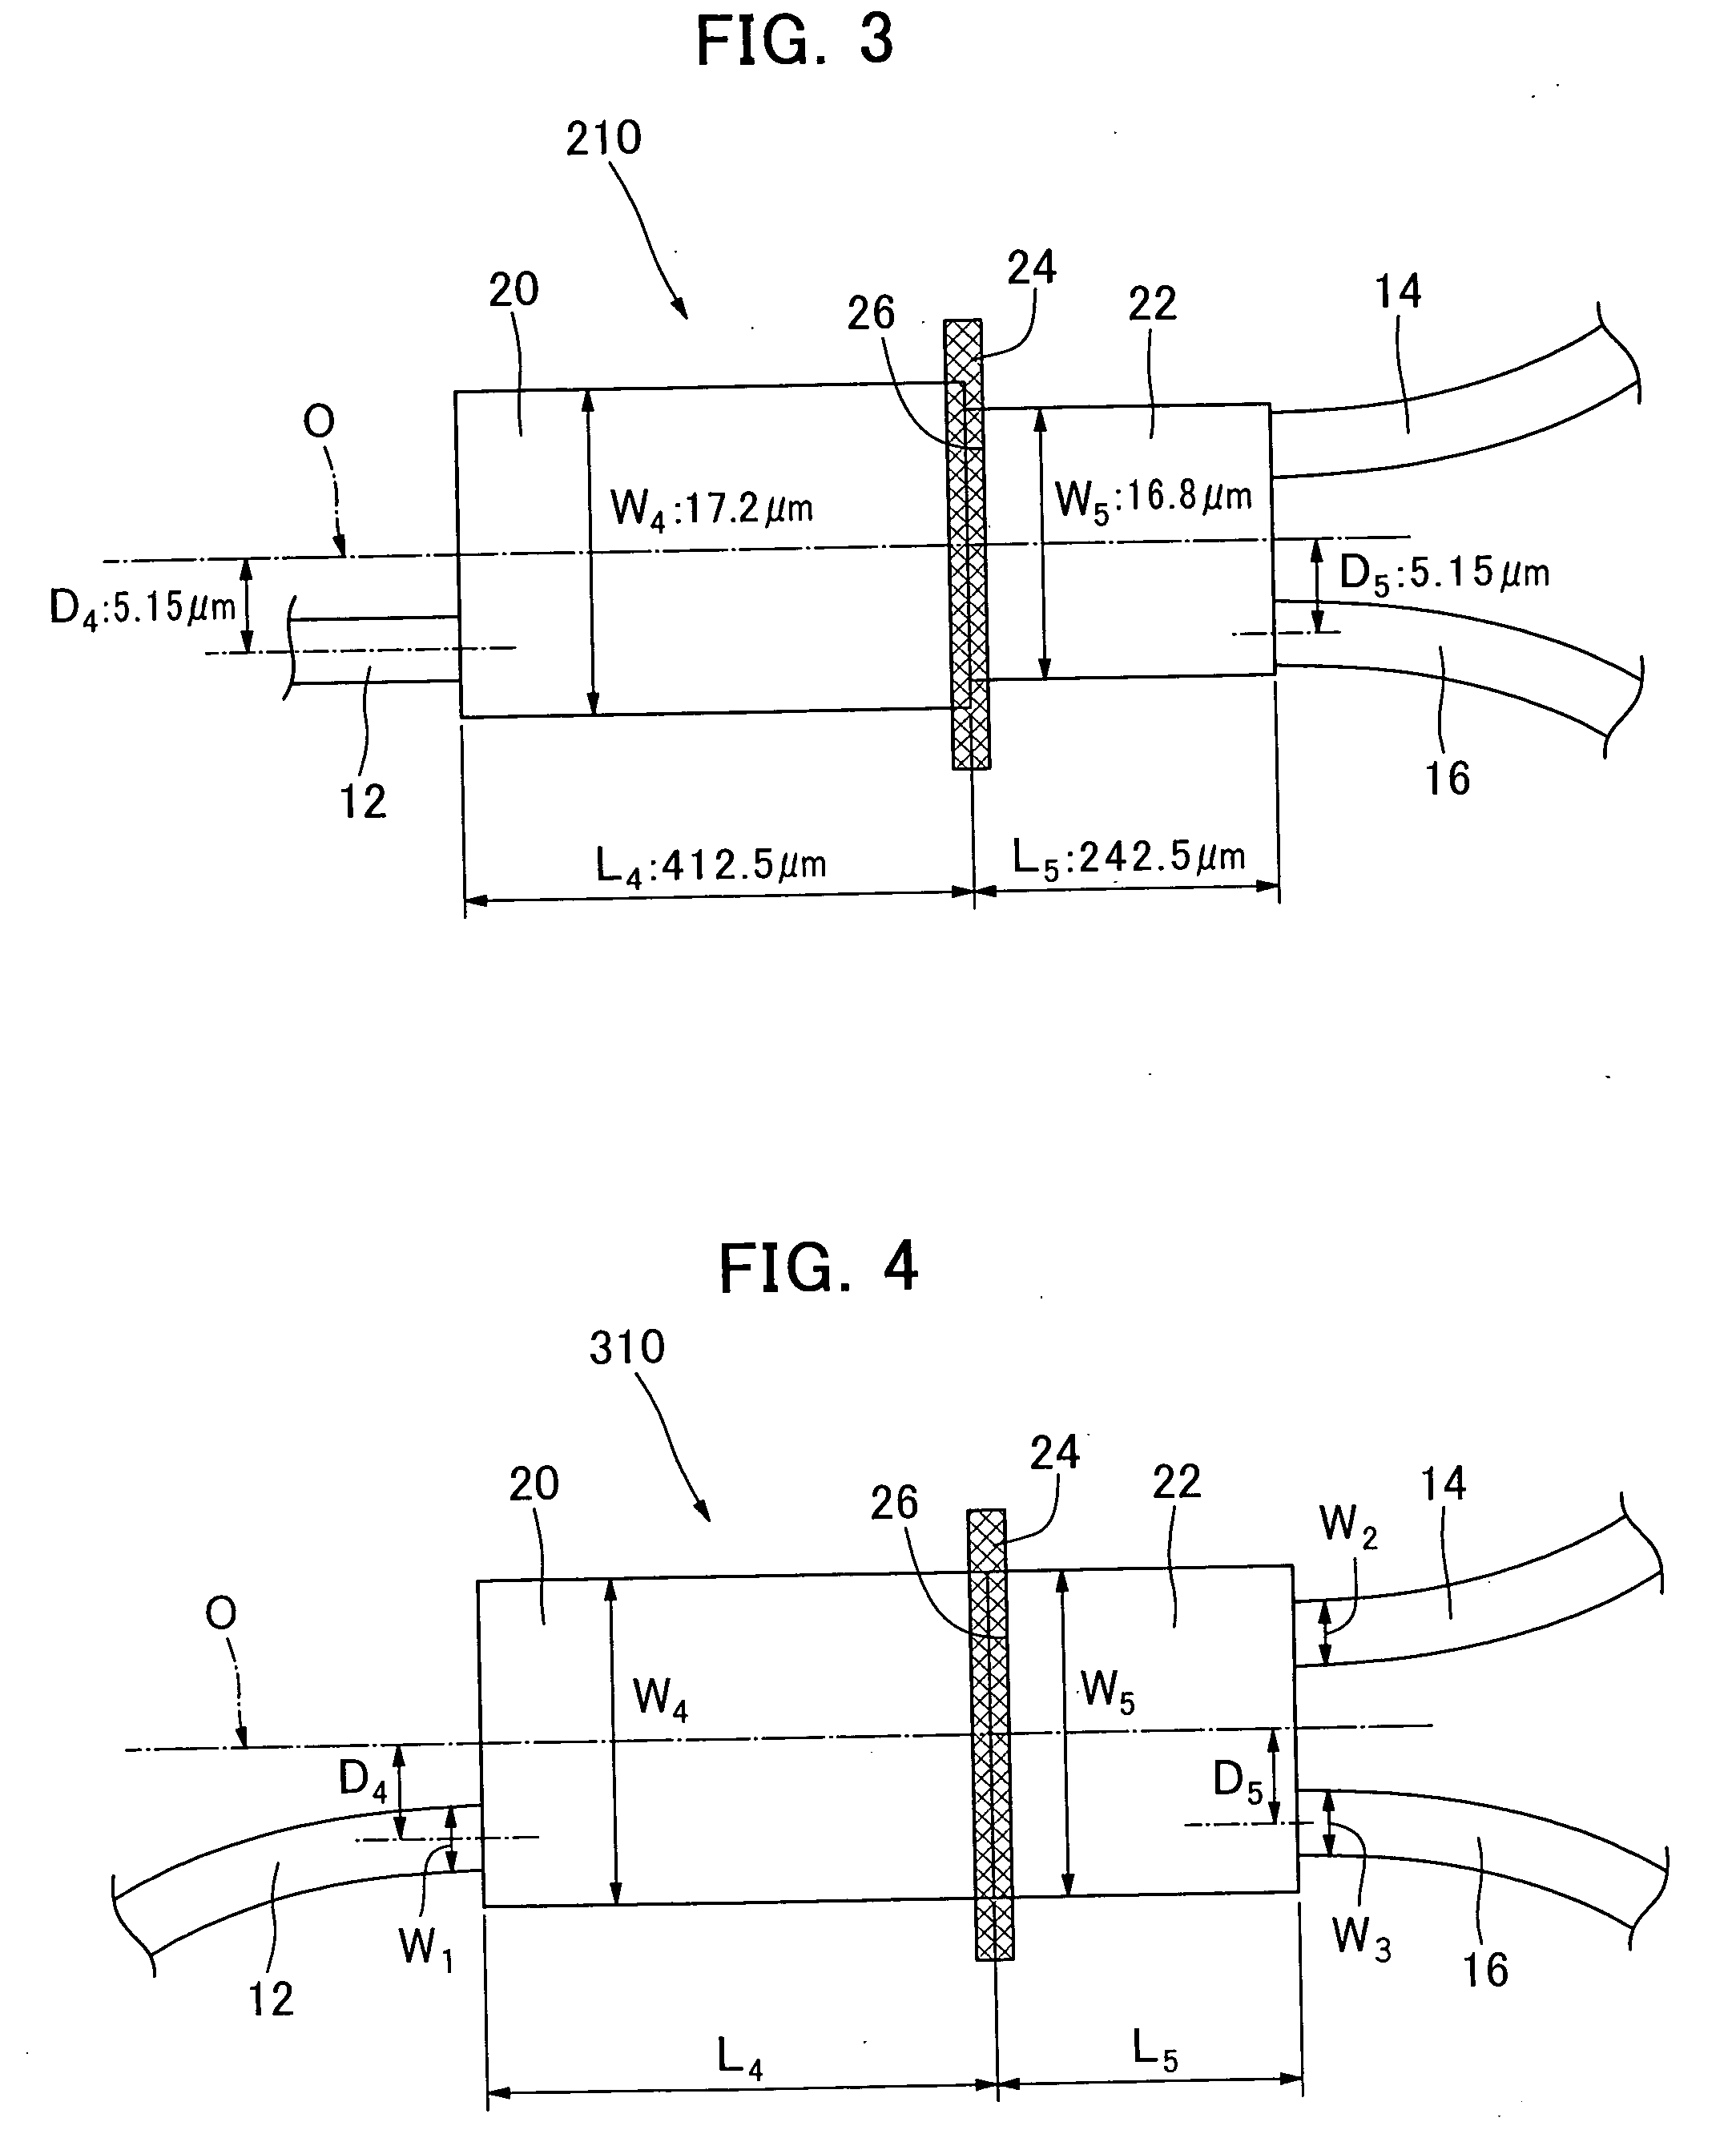 Optical system with optical waveguides